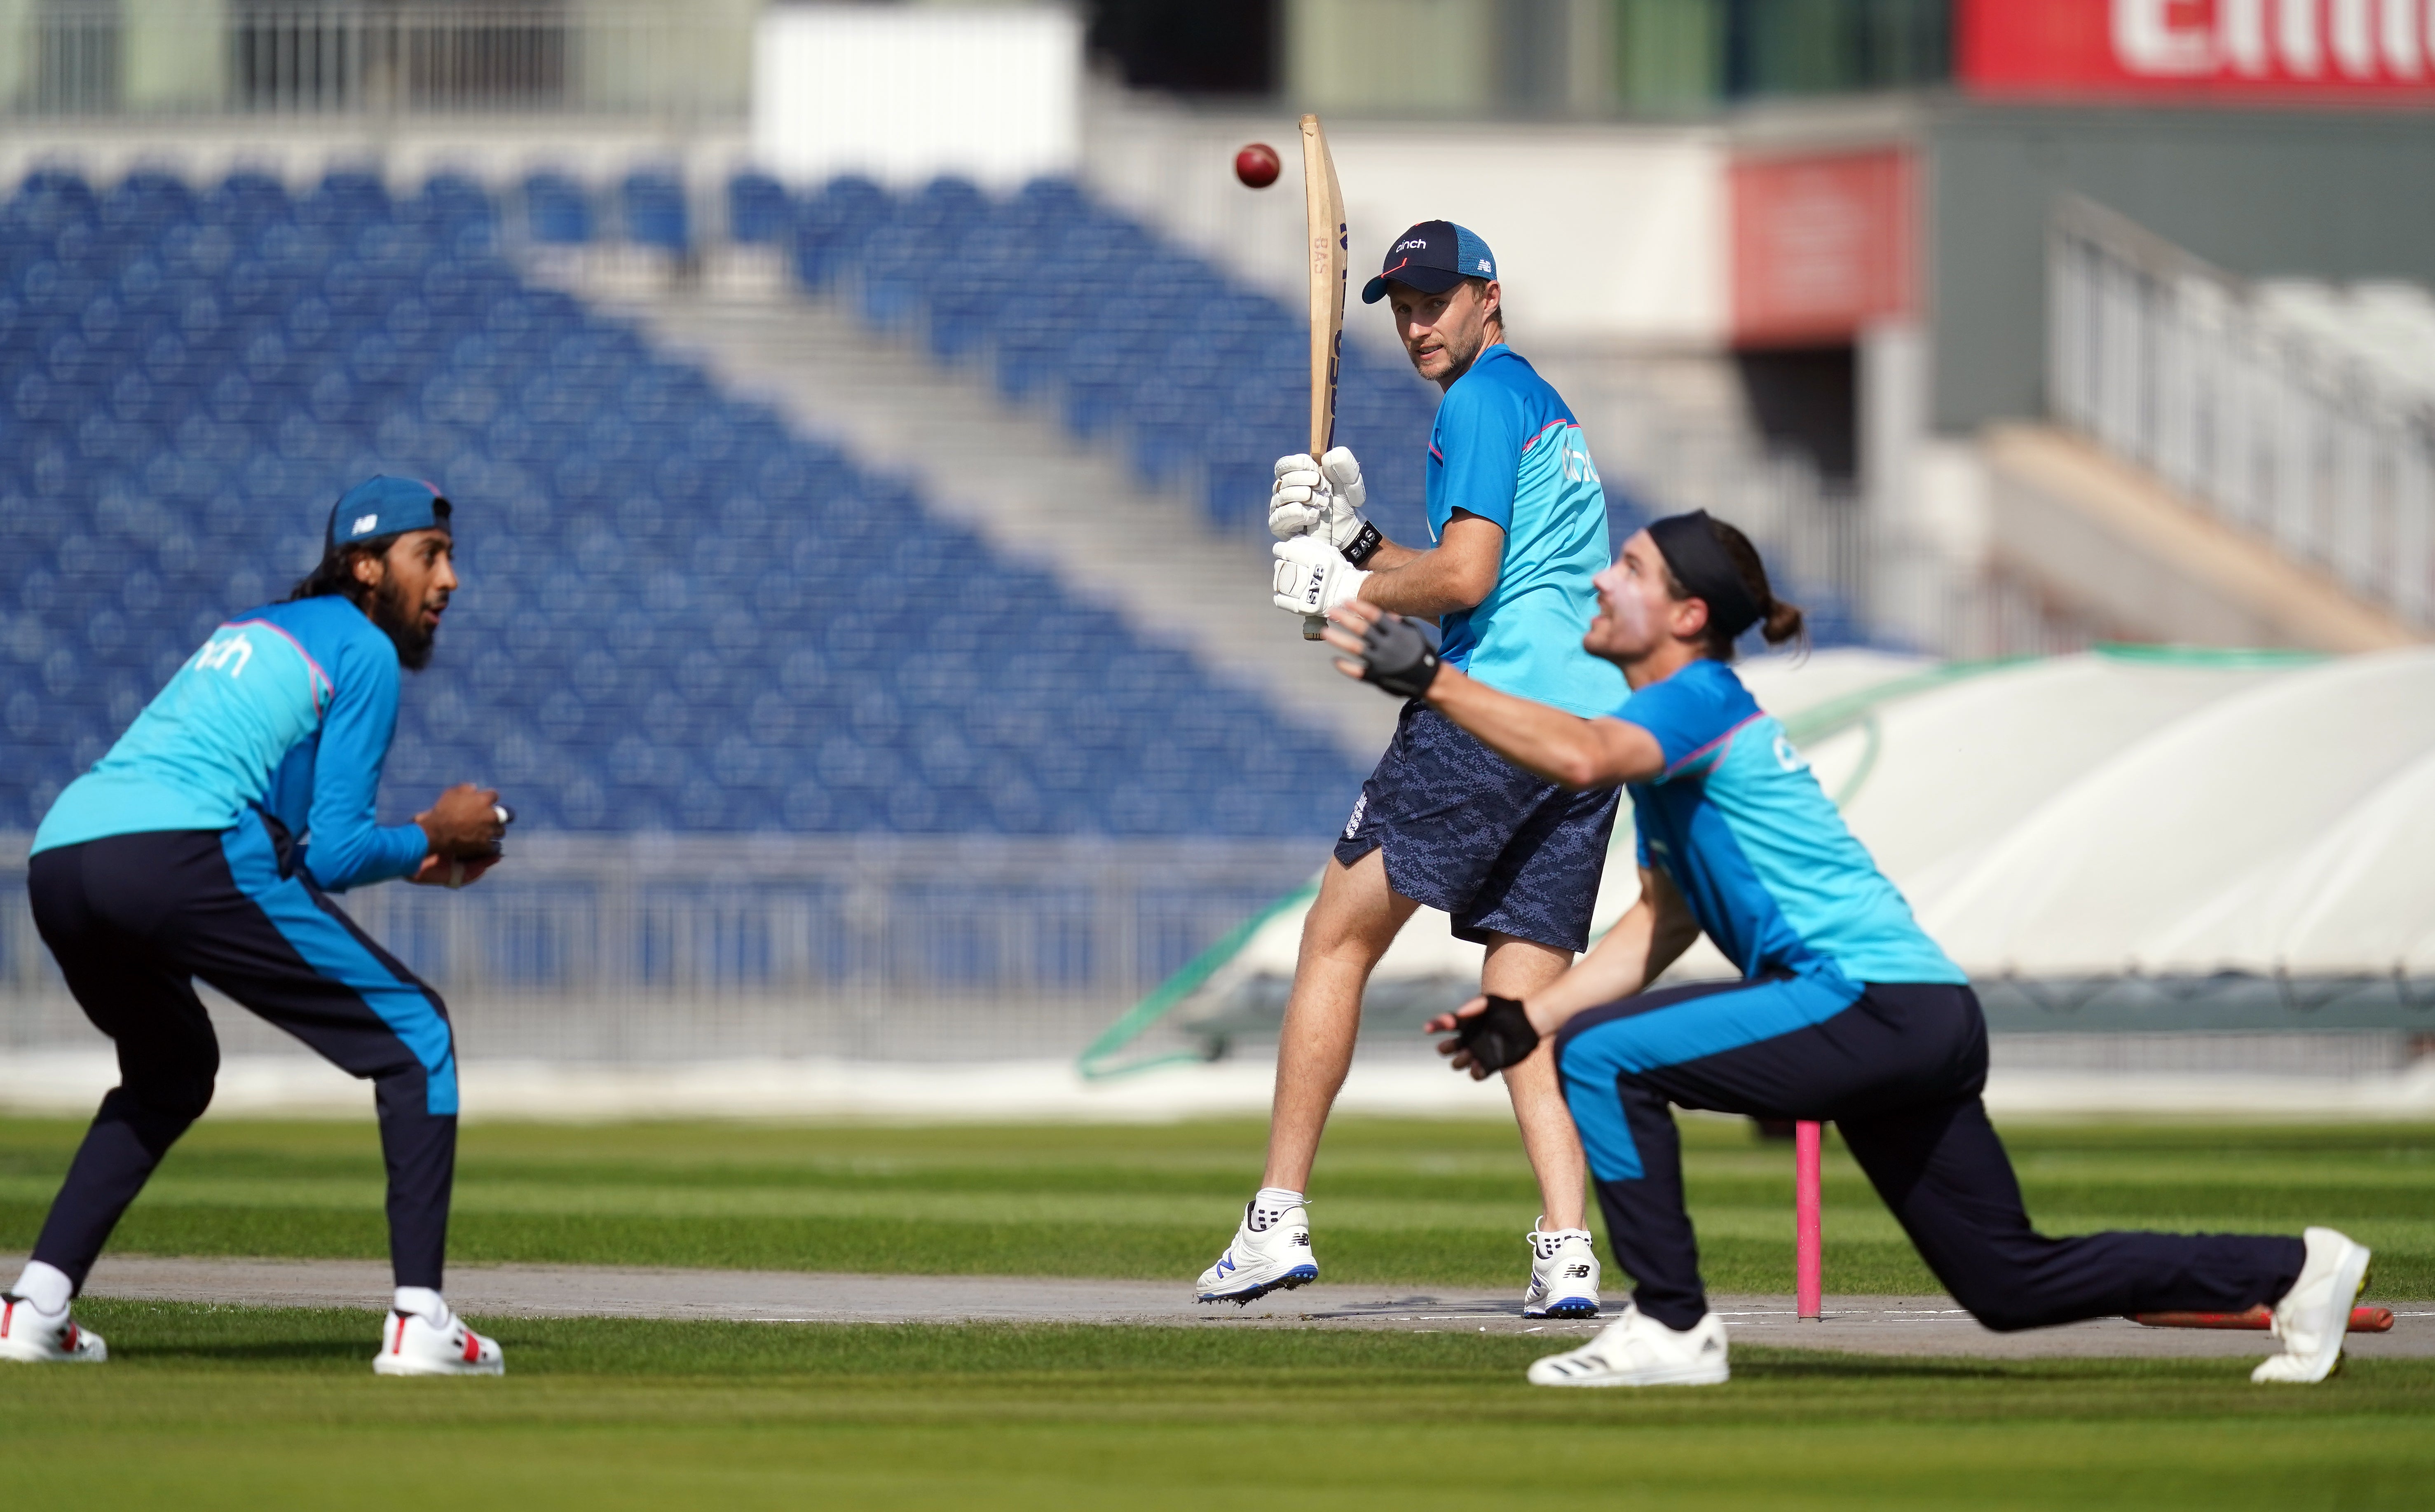 England completed their final training session at Old Trafford, but India were nowhere to be seen (Martin Rickett/PA)